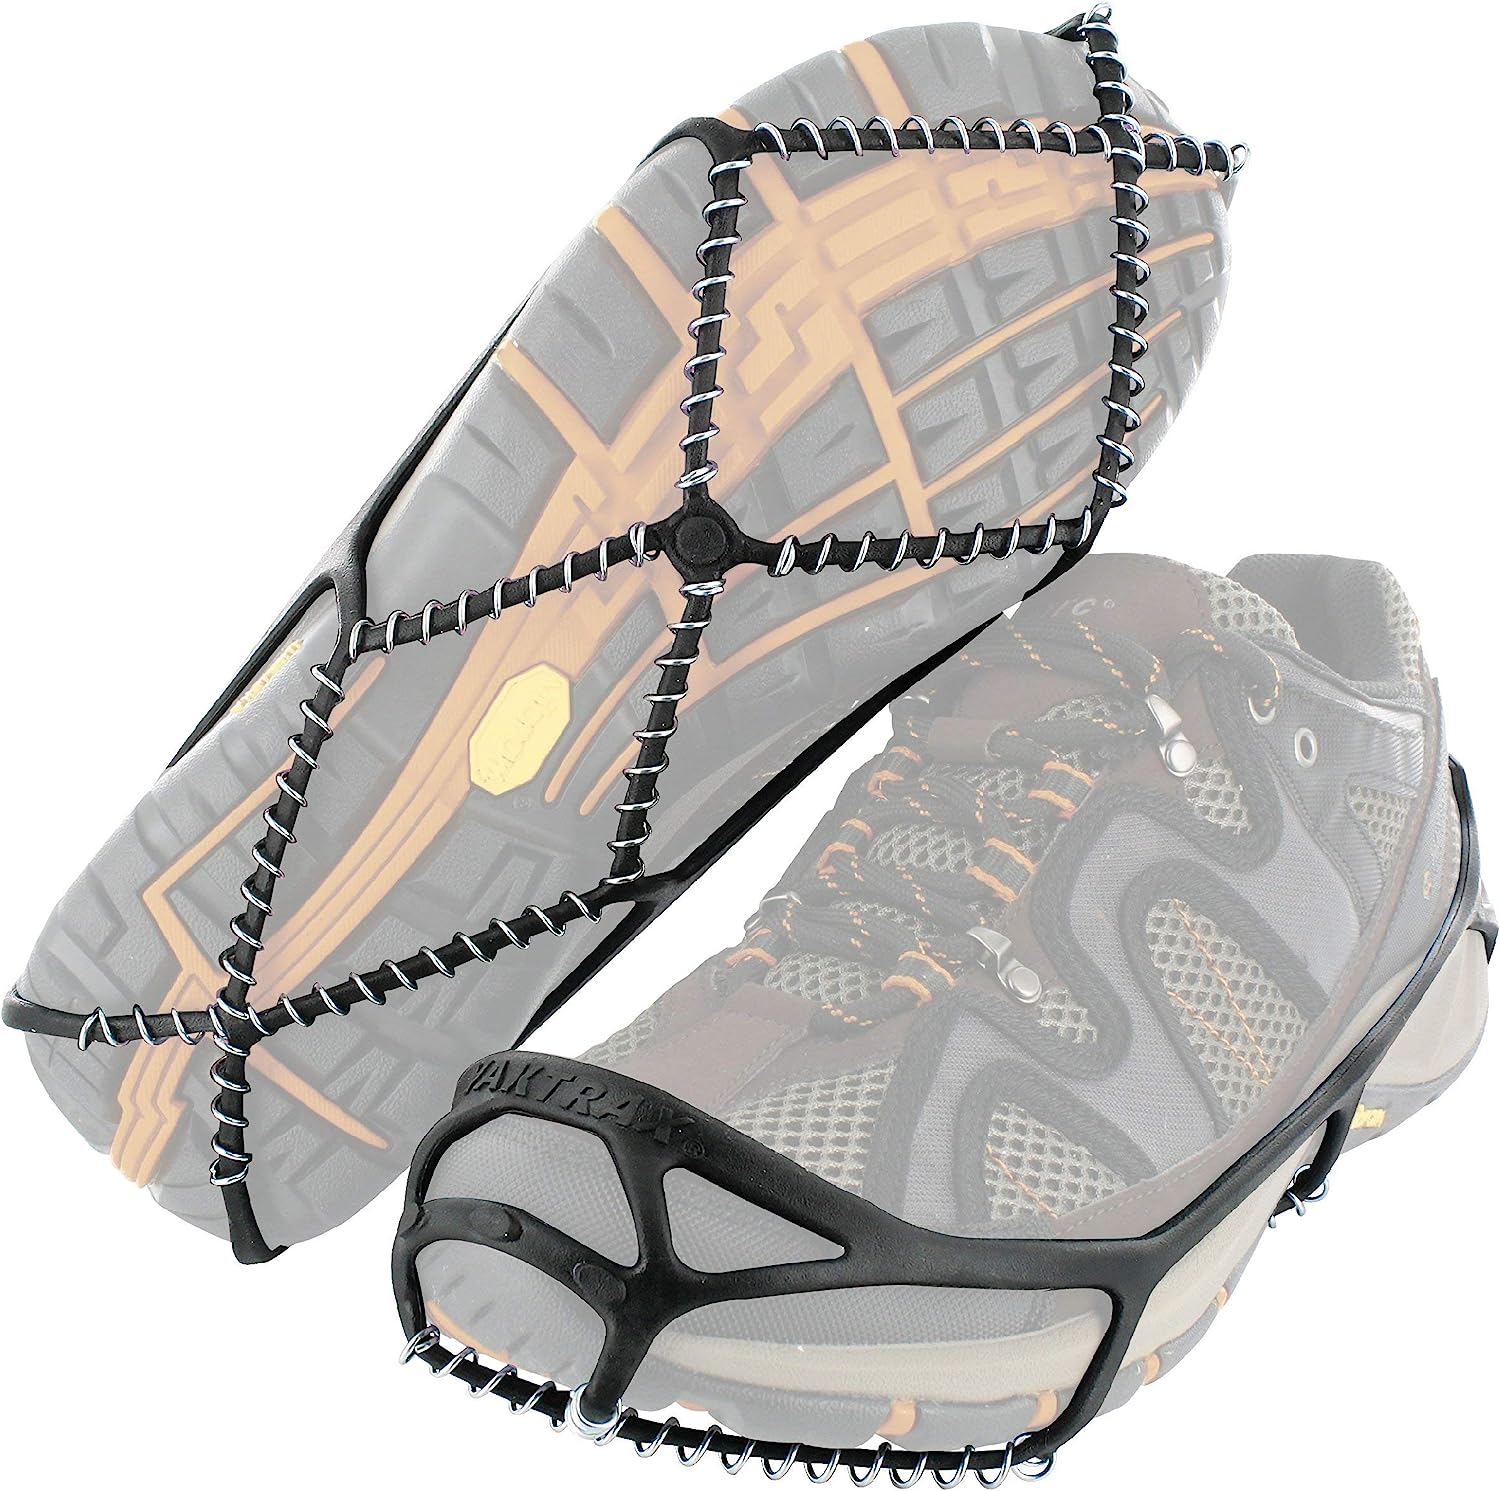 Yaktrax Hiking and Walking Traction Cleats for Snow, [...]